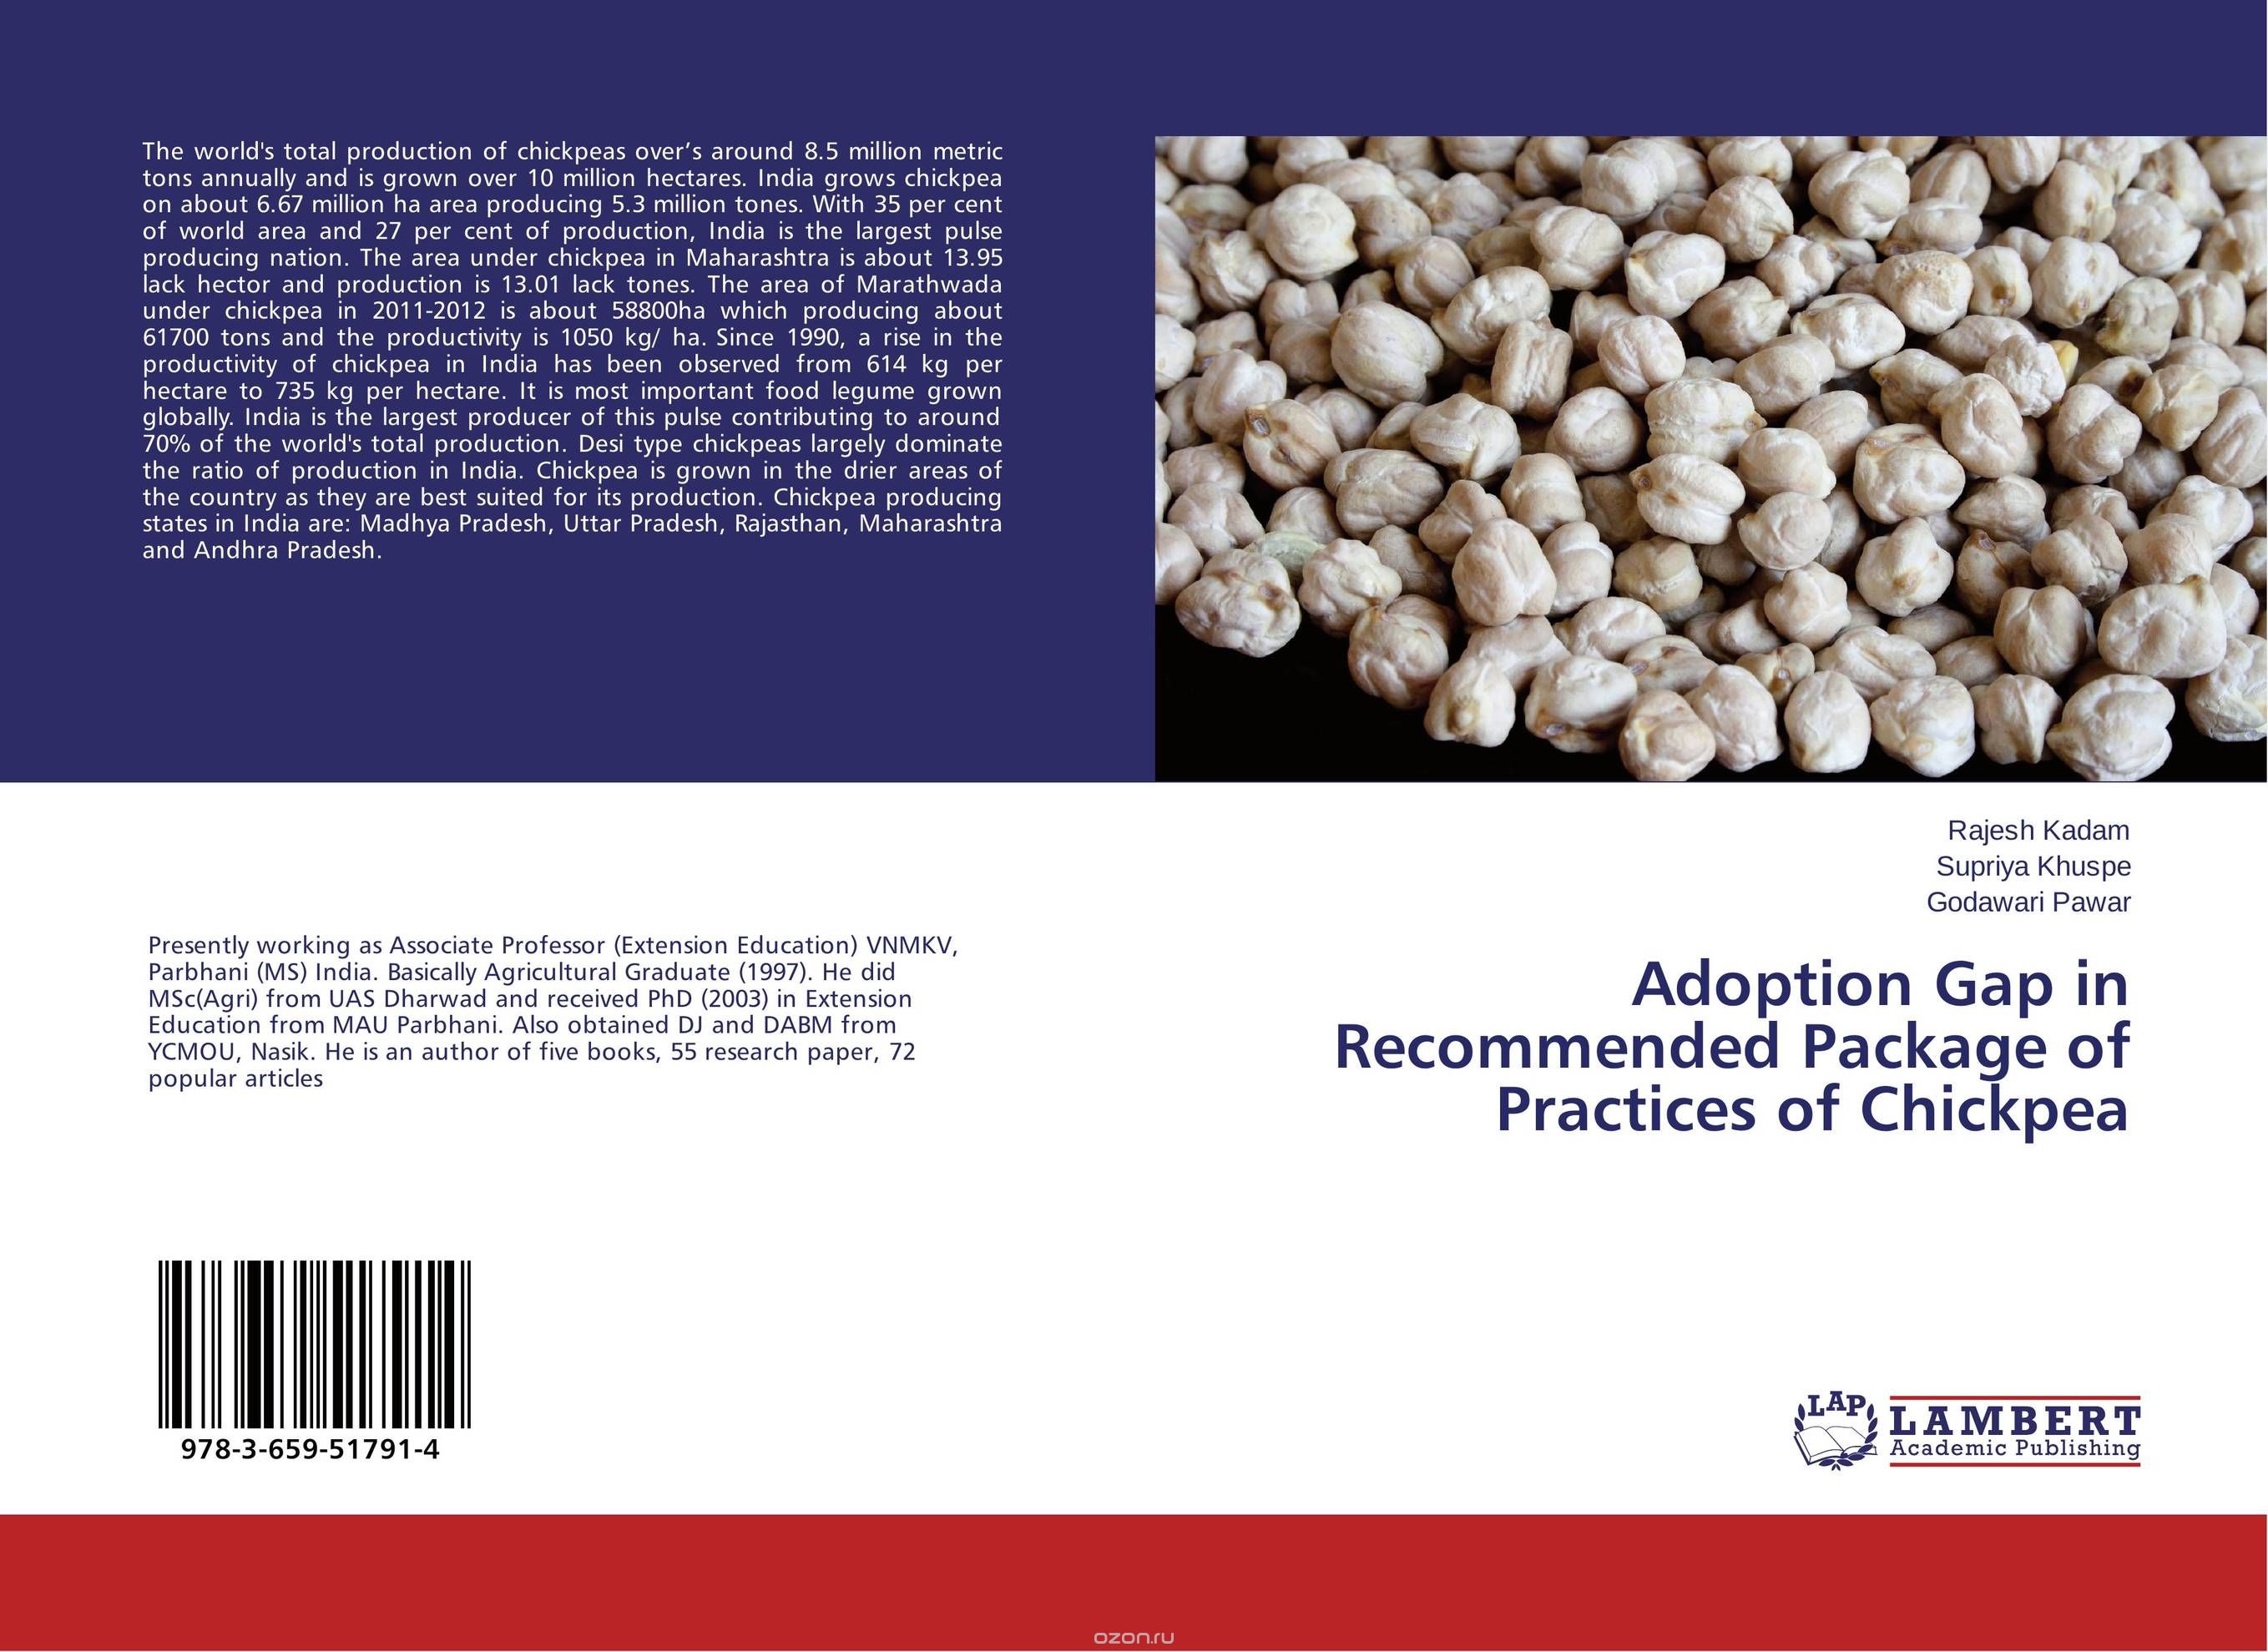 Скачать книгу "Adoption Gap in Recommended Package of Practices of Chickpea"